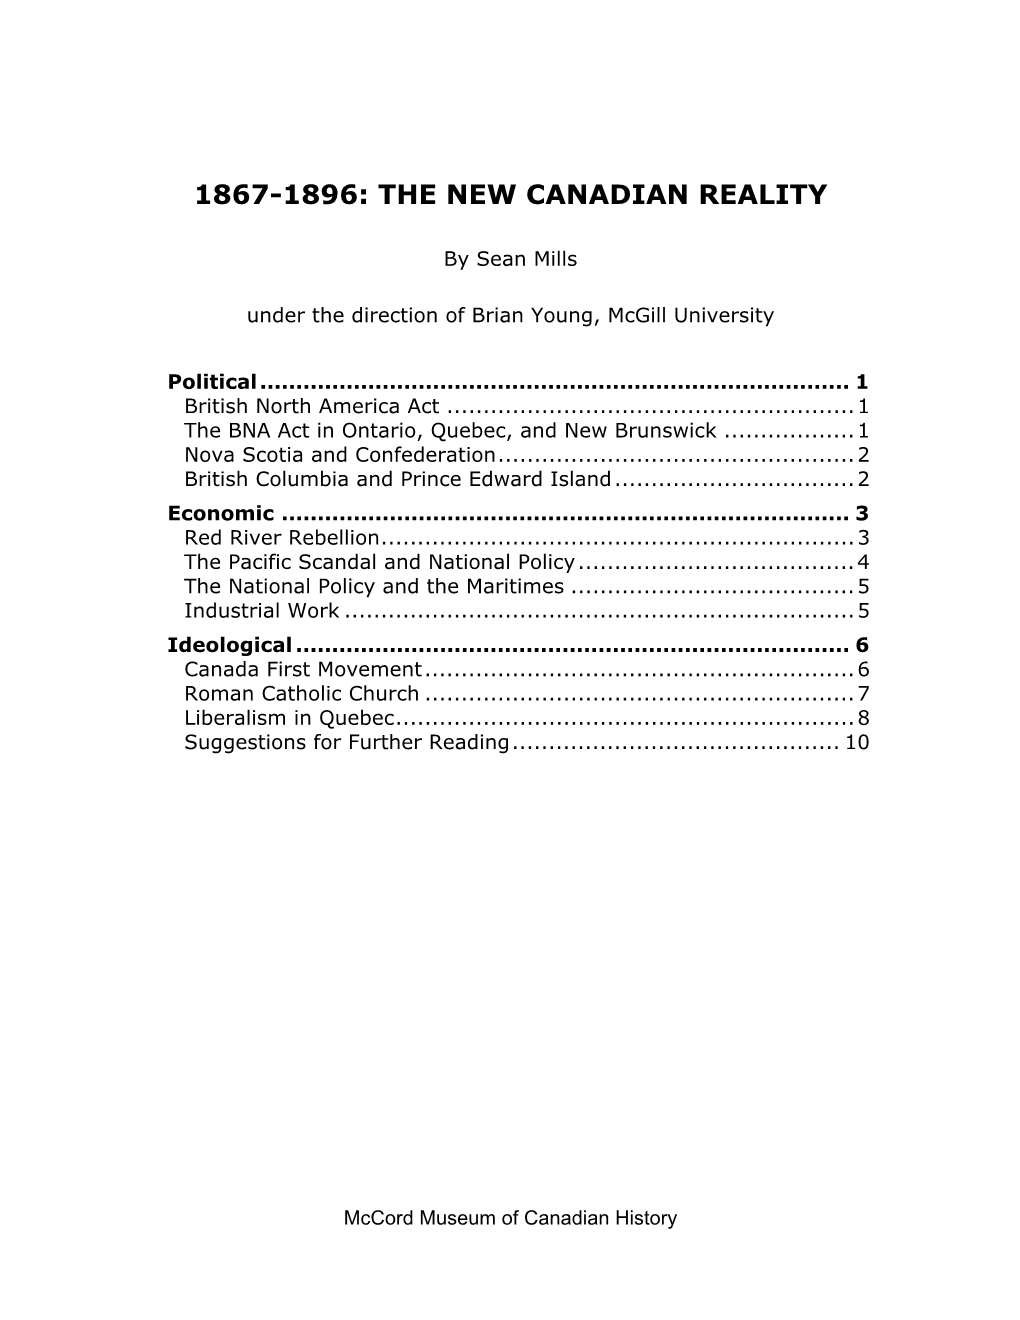 The Main Events of Canadian History, from 1840 to 1929